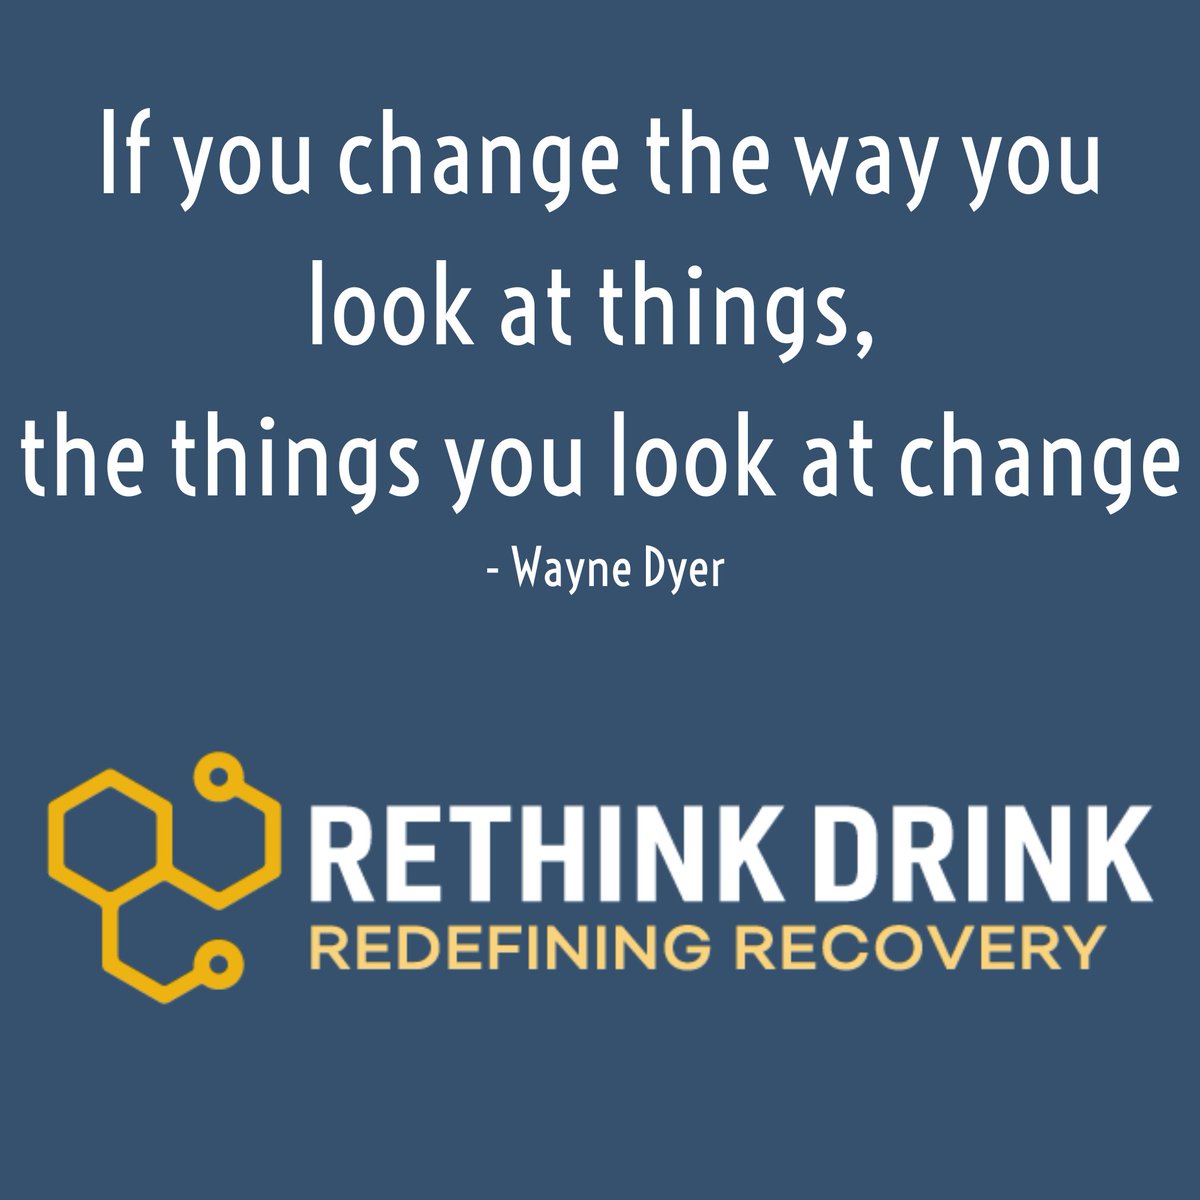 #alcoholrecovery #alcoholcoach #soberlife #sobriety #alcoholfree #alcoholawareness #HealthyLiving #healthylifestyle